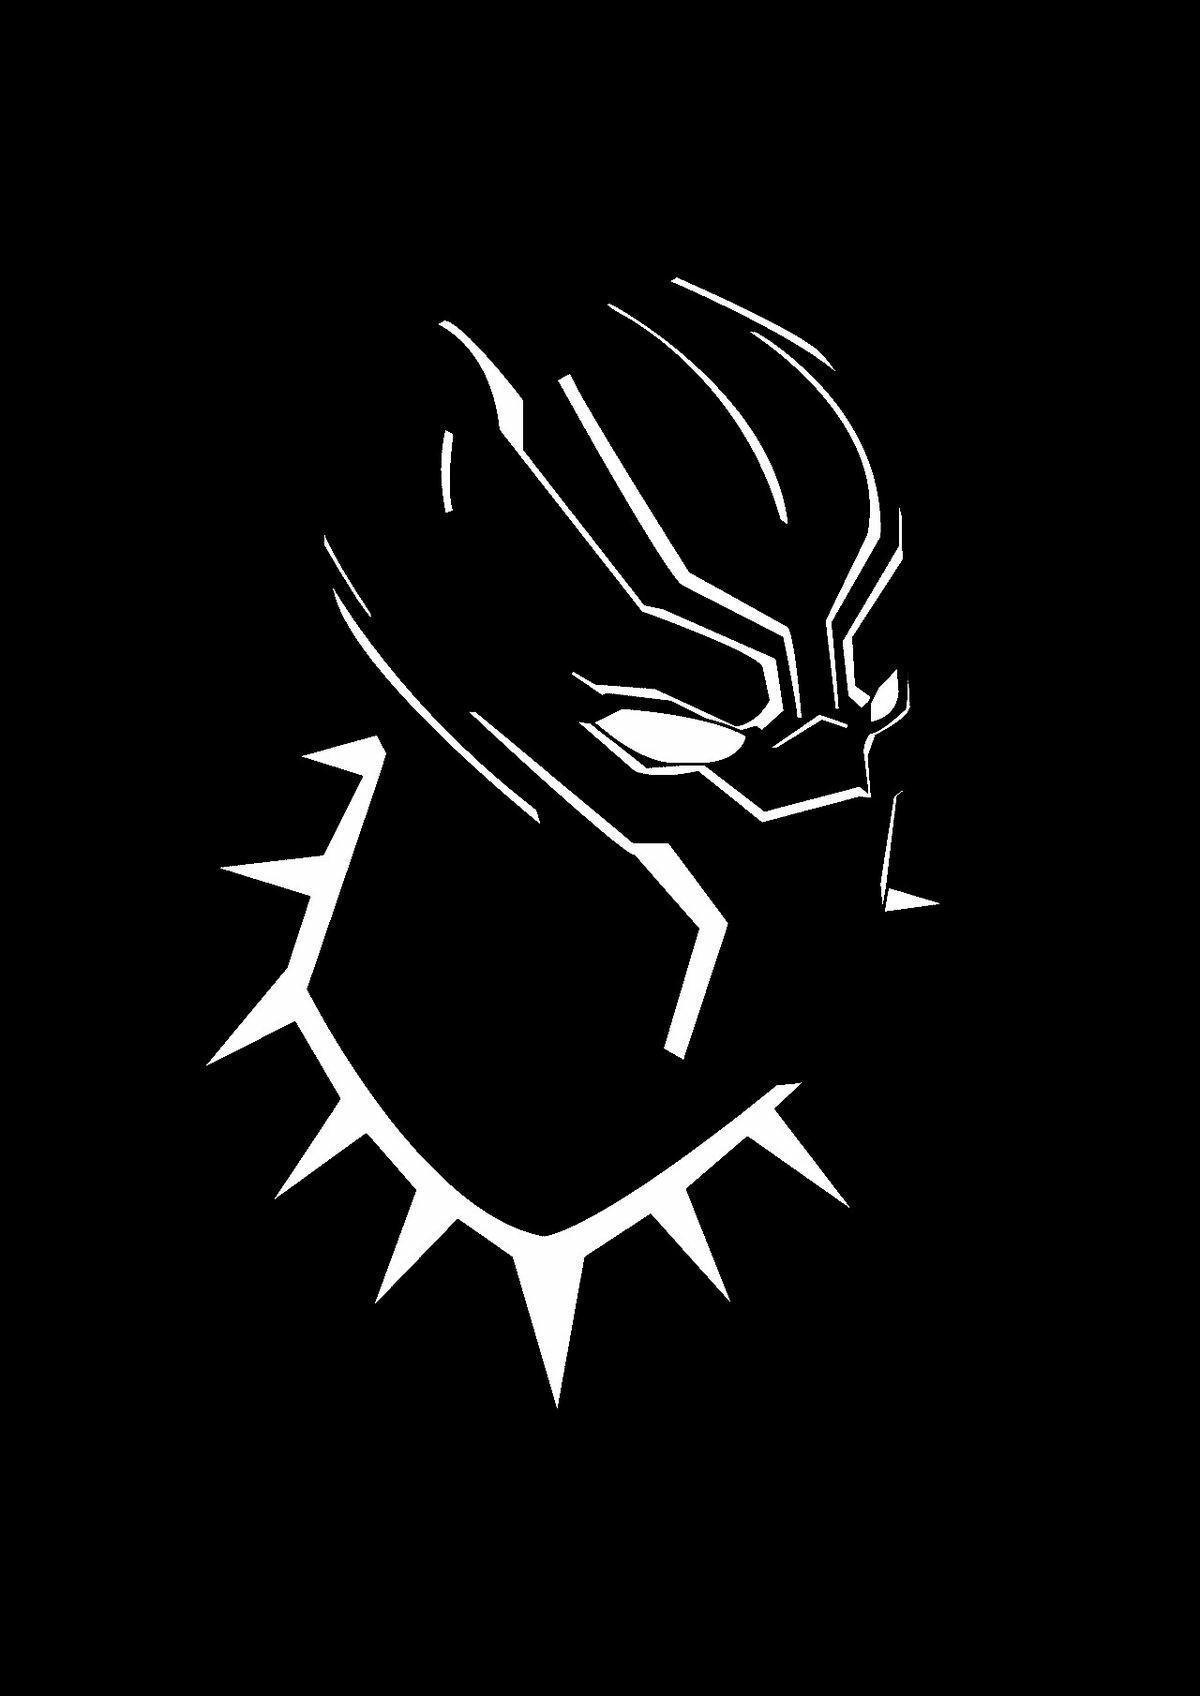 Black Panther instal the new for android